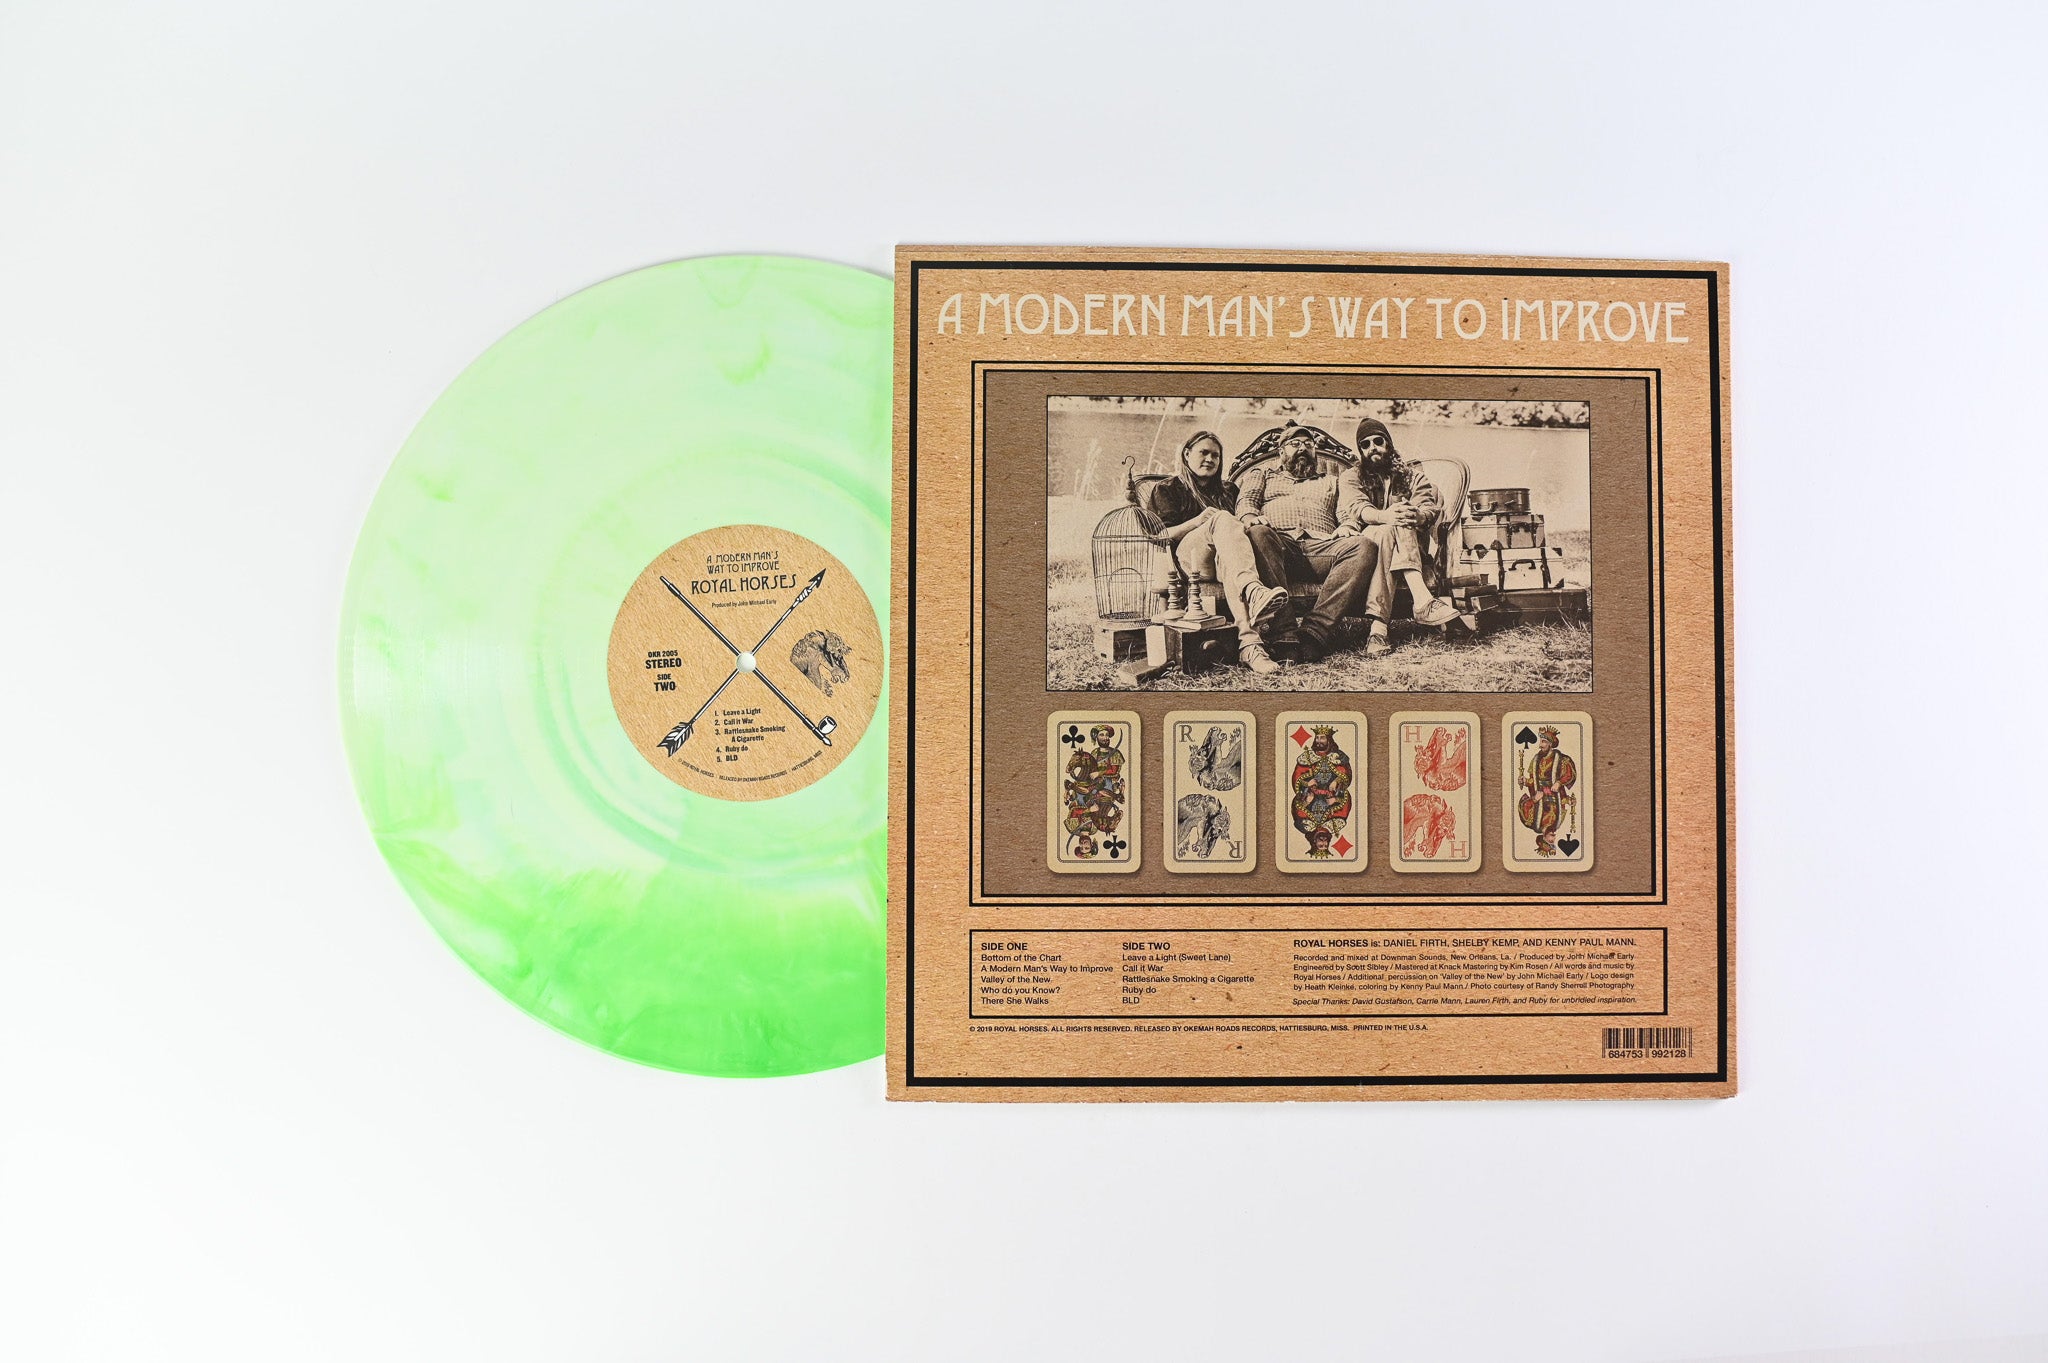 Royal Horses - A Modern Man's Way To Improve on Okemah Roads Records - Green & White Marble